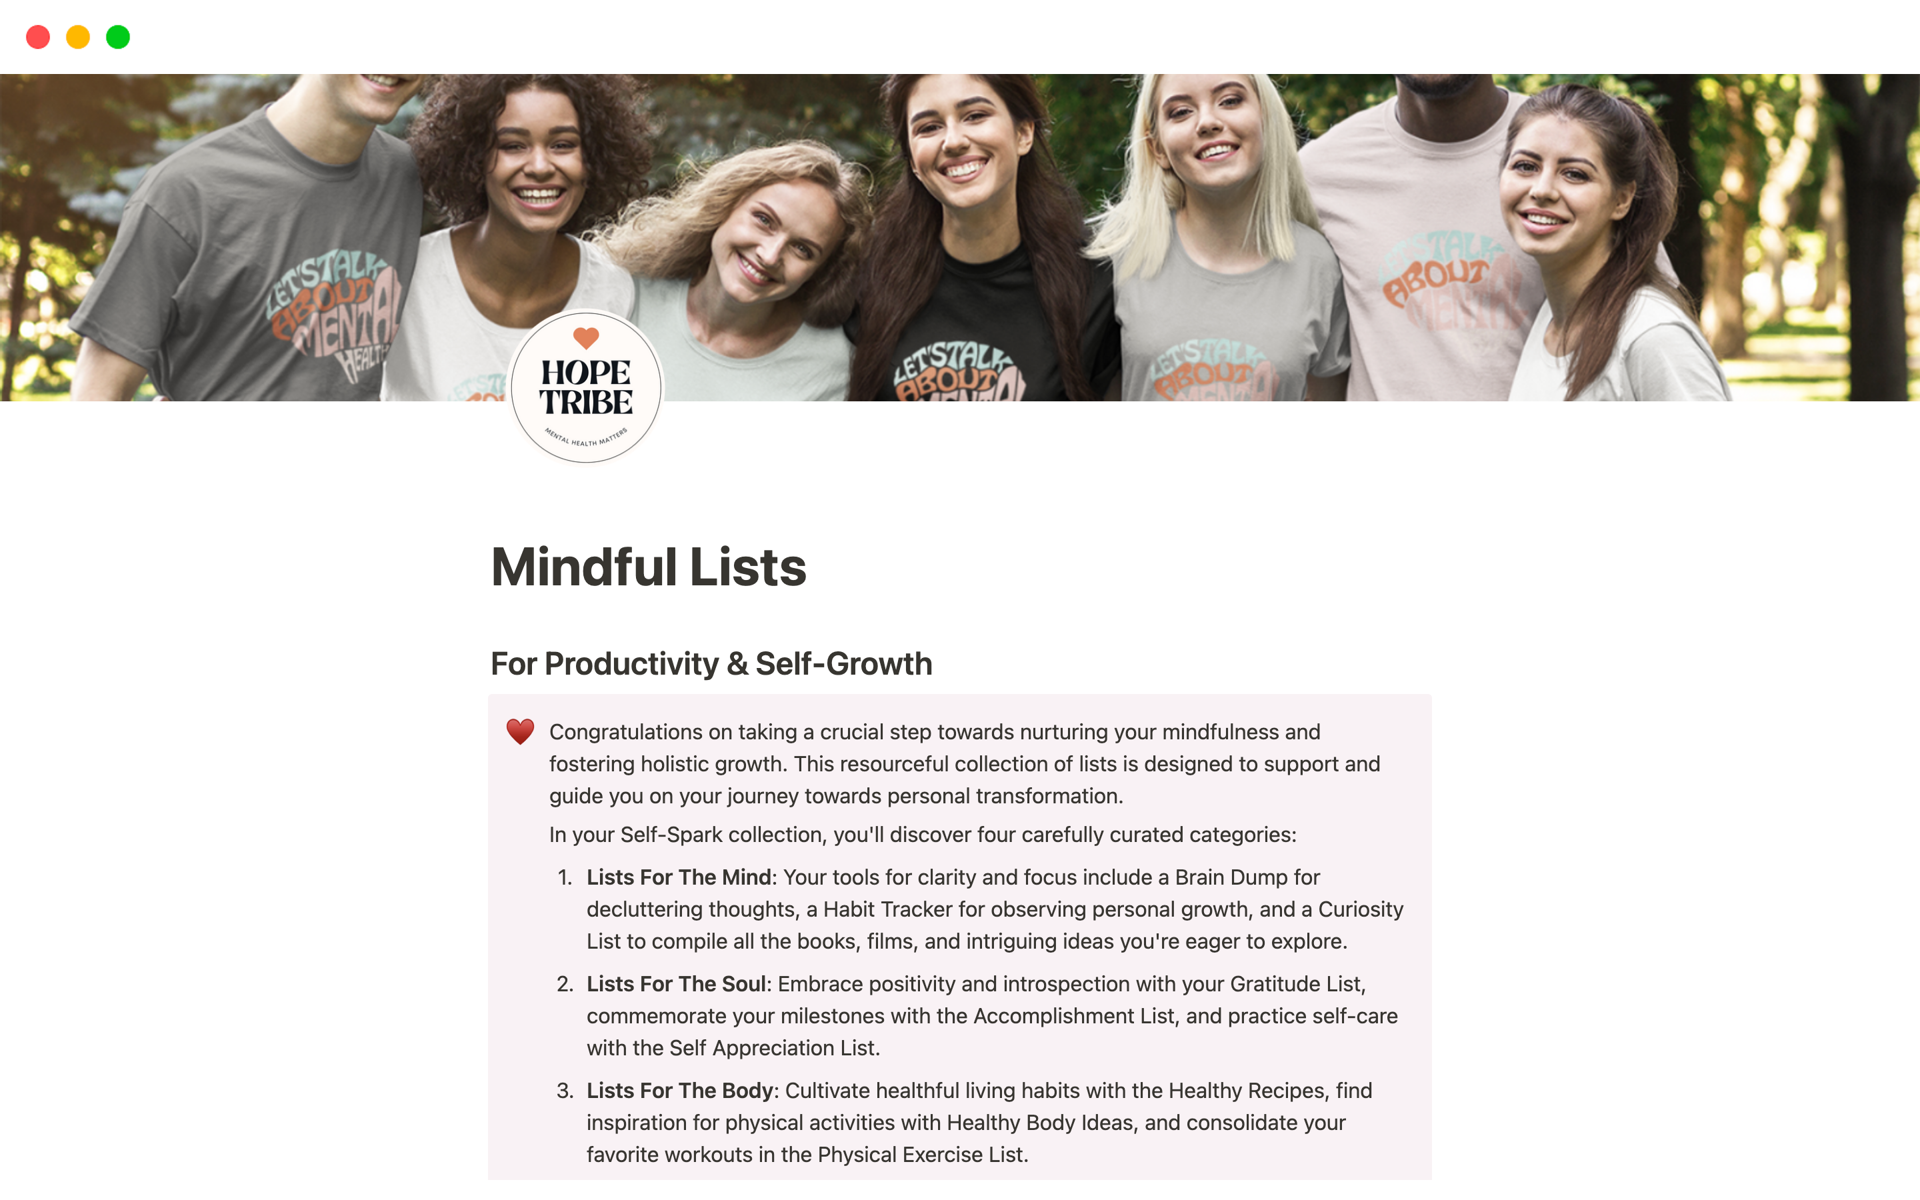  A list collection designed to gently guide you towards greater self-awareness, positivity, and organisation.